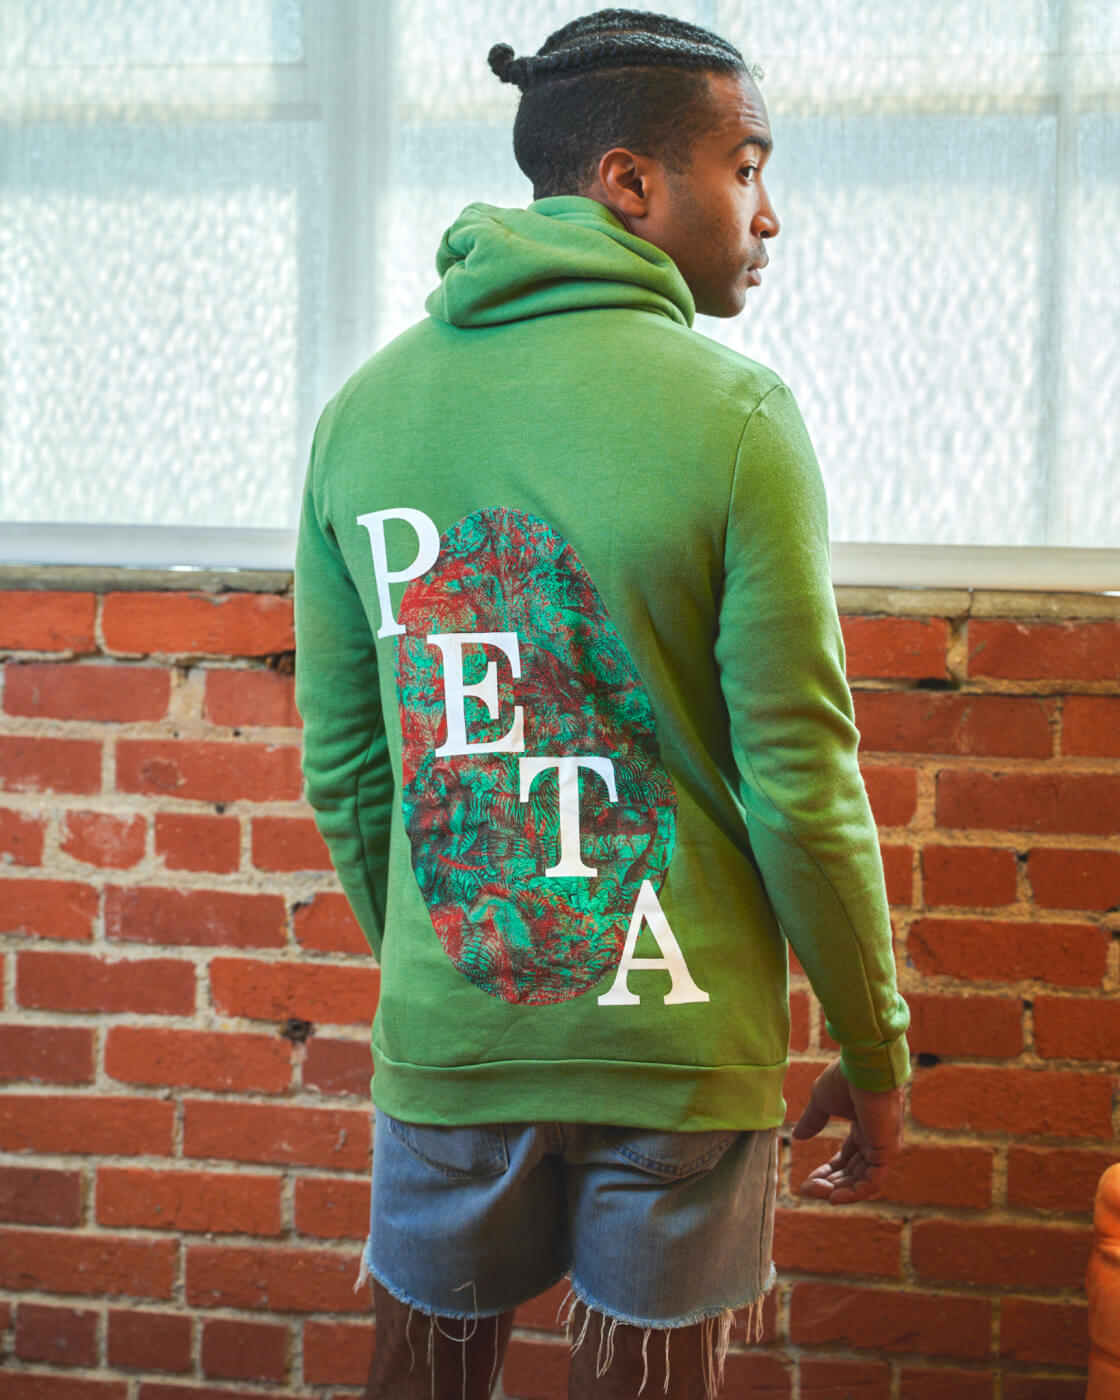 A model stands with their back to the camera and their face in side profile view, the back of their green sweatshirts says "PETA"